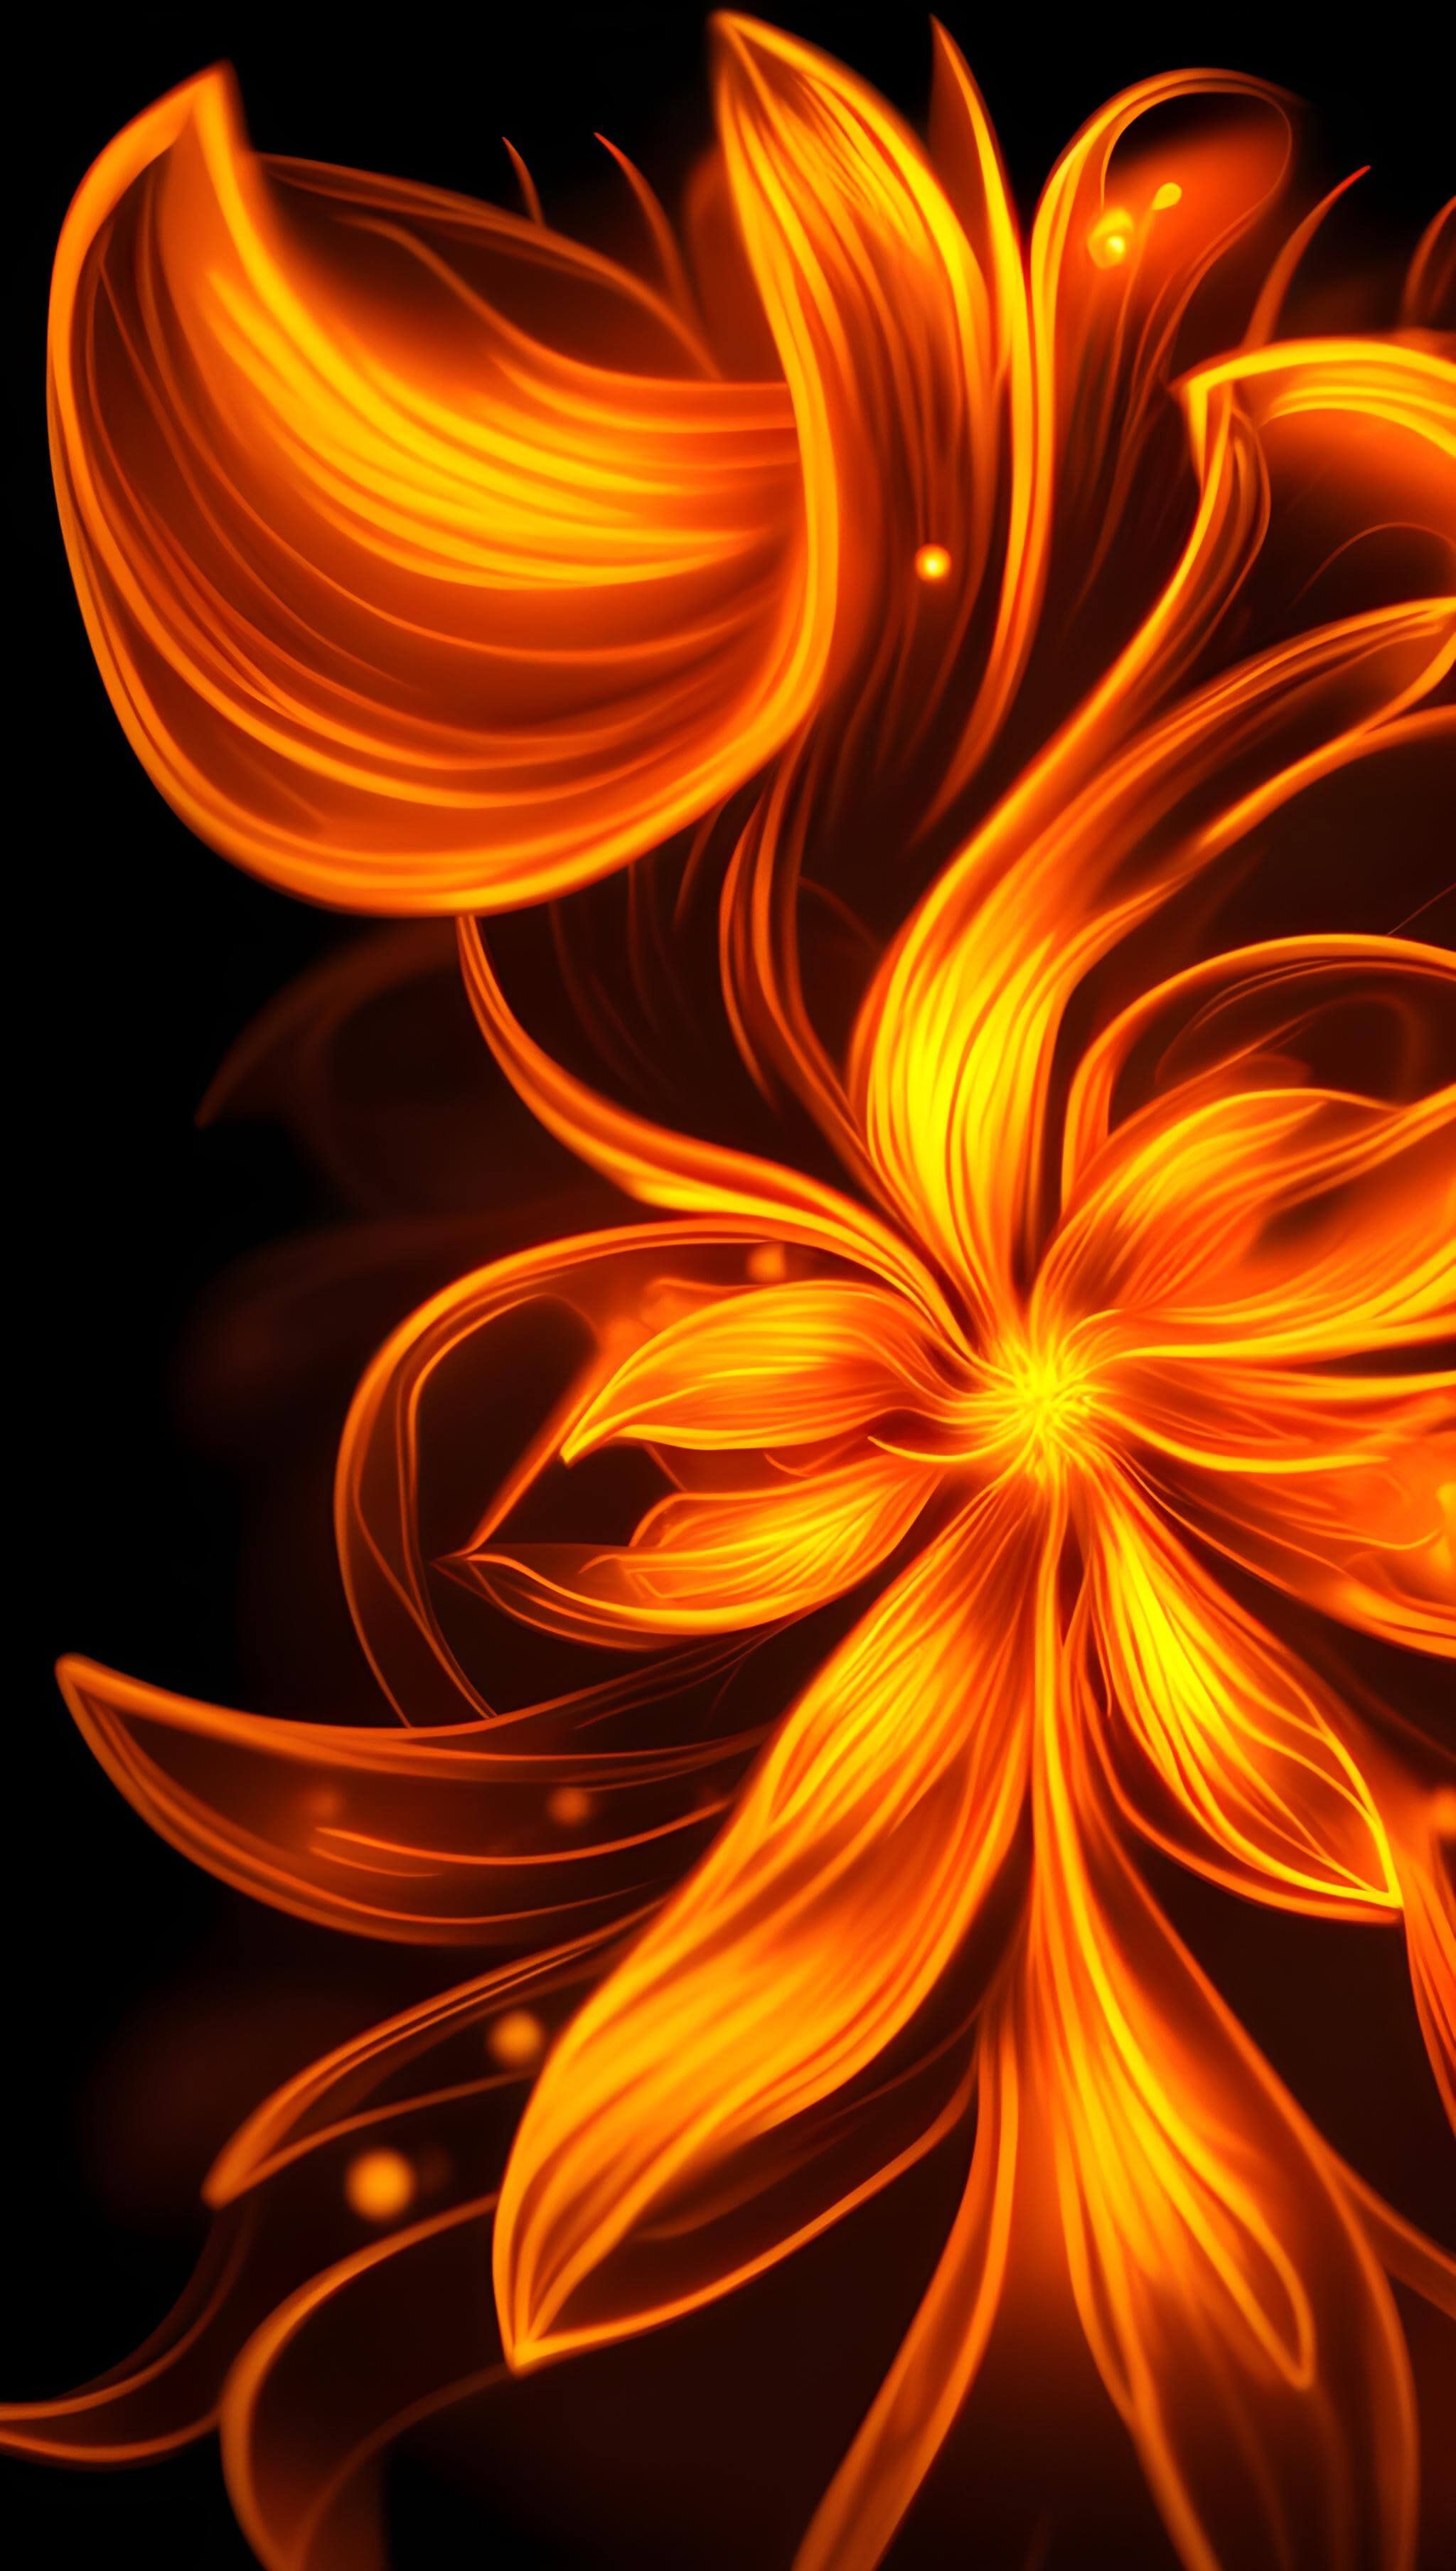 A flame that is orange and yellow - Abstract, flower, fire